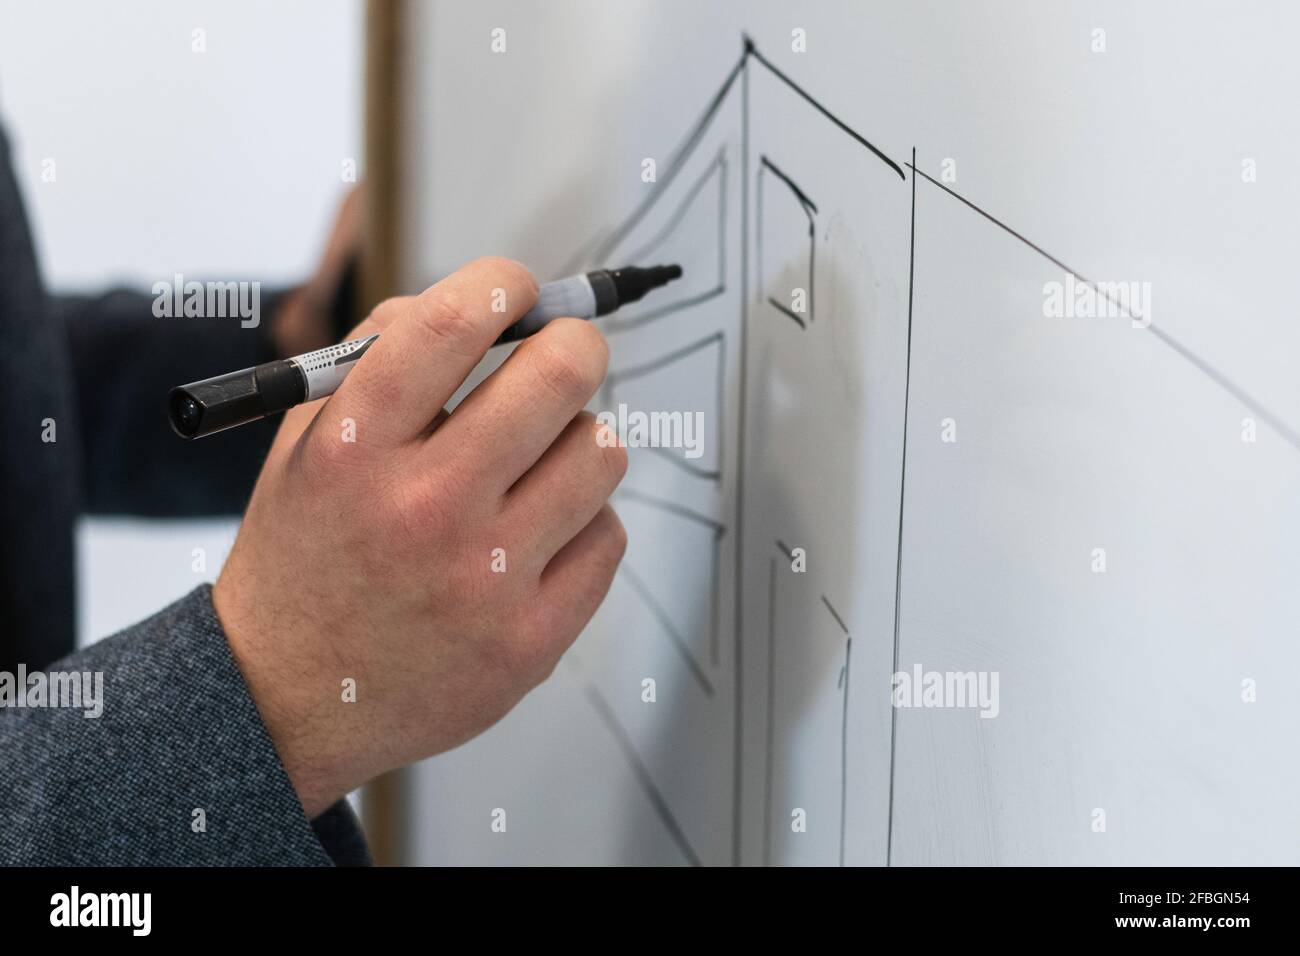 Businessman drawing diagram on whiteboard Stock Photo